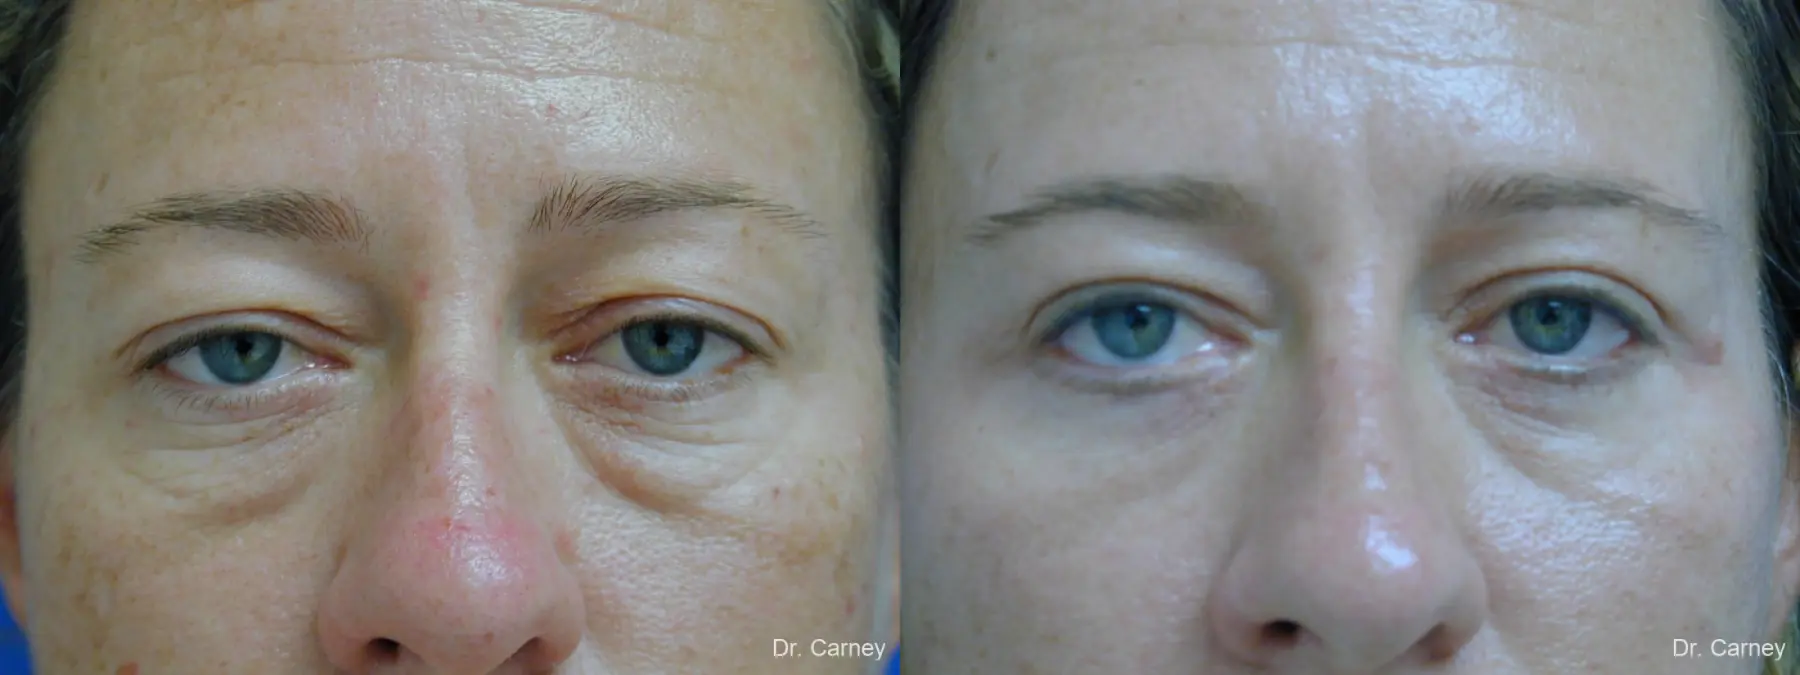 Virginia Beach Eyelid Lift 1209 - Before and After 1